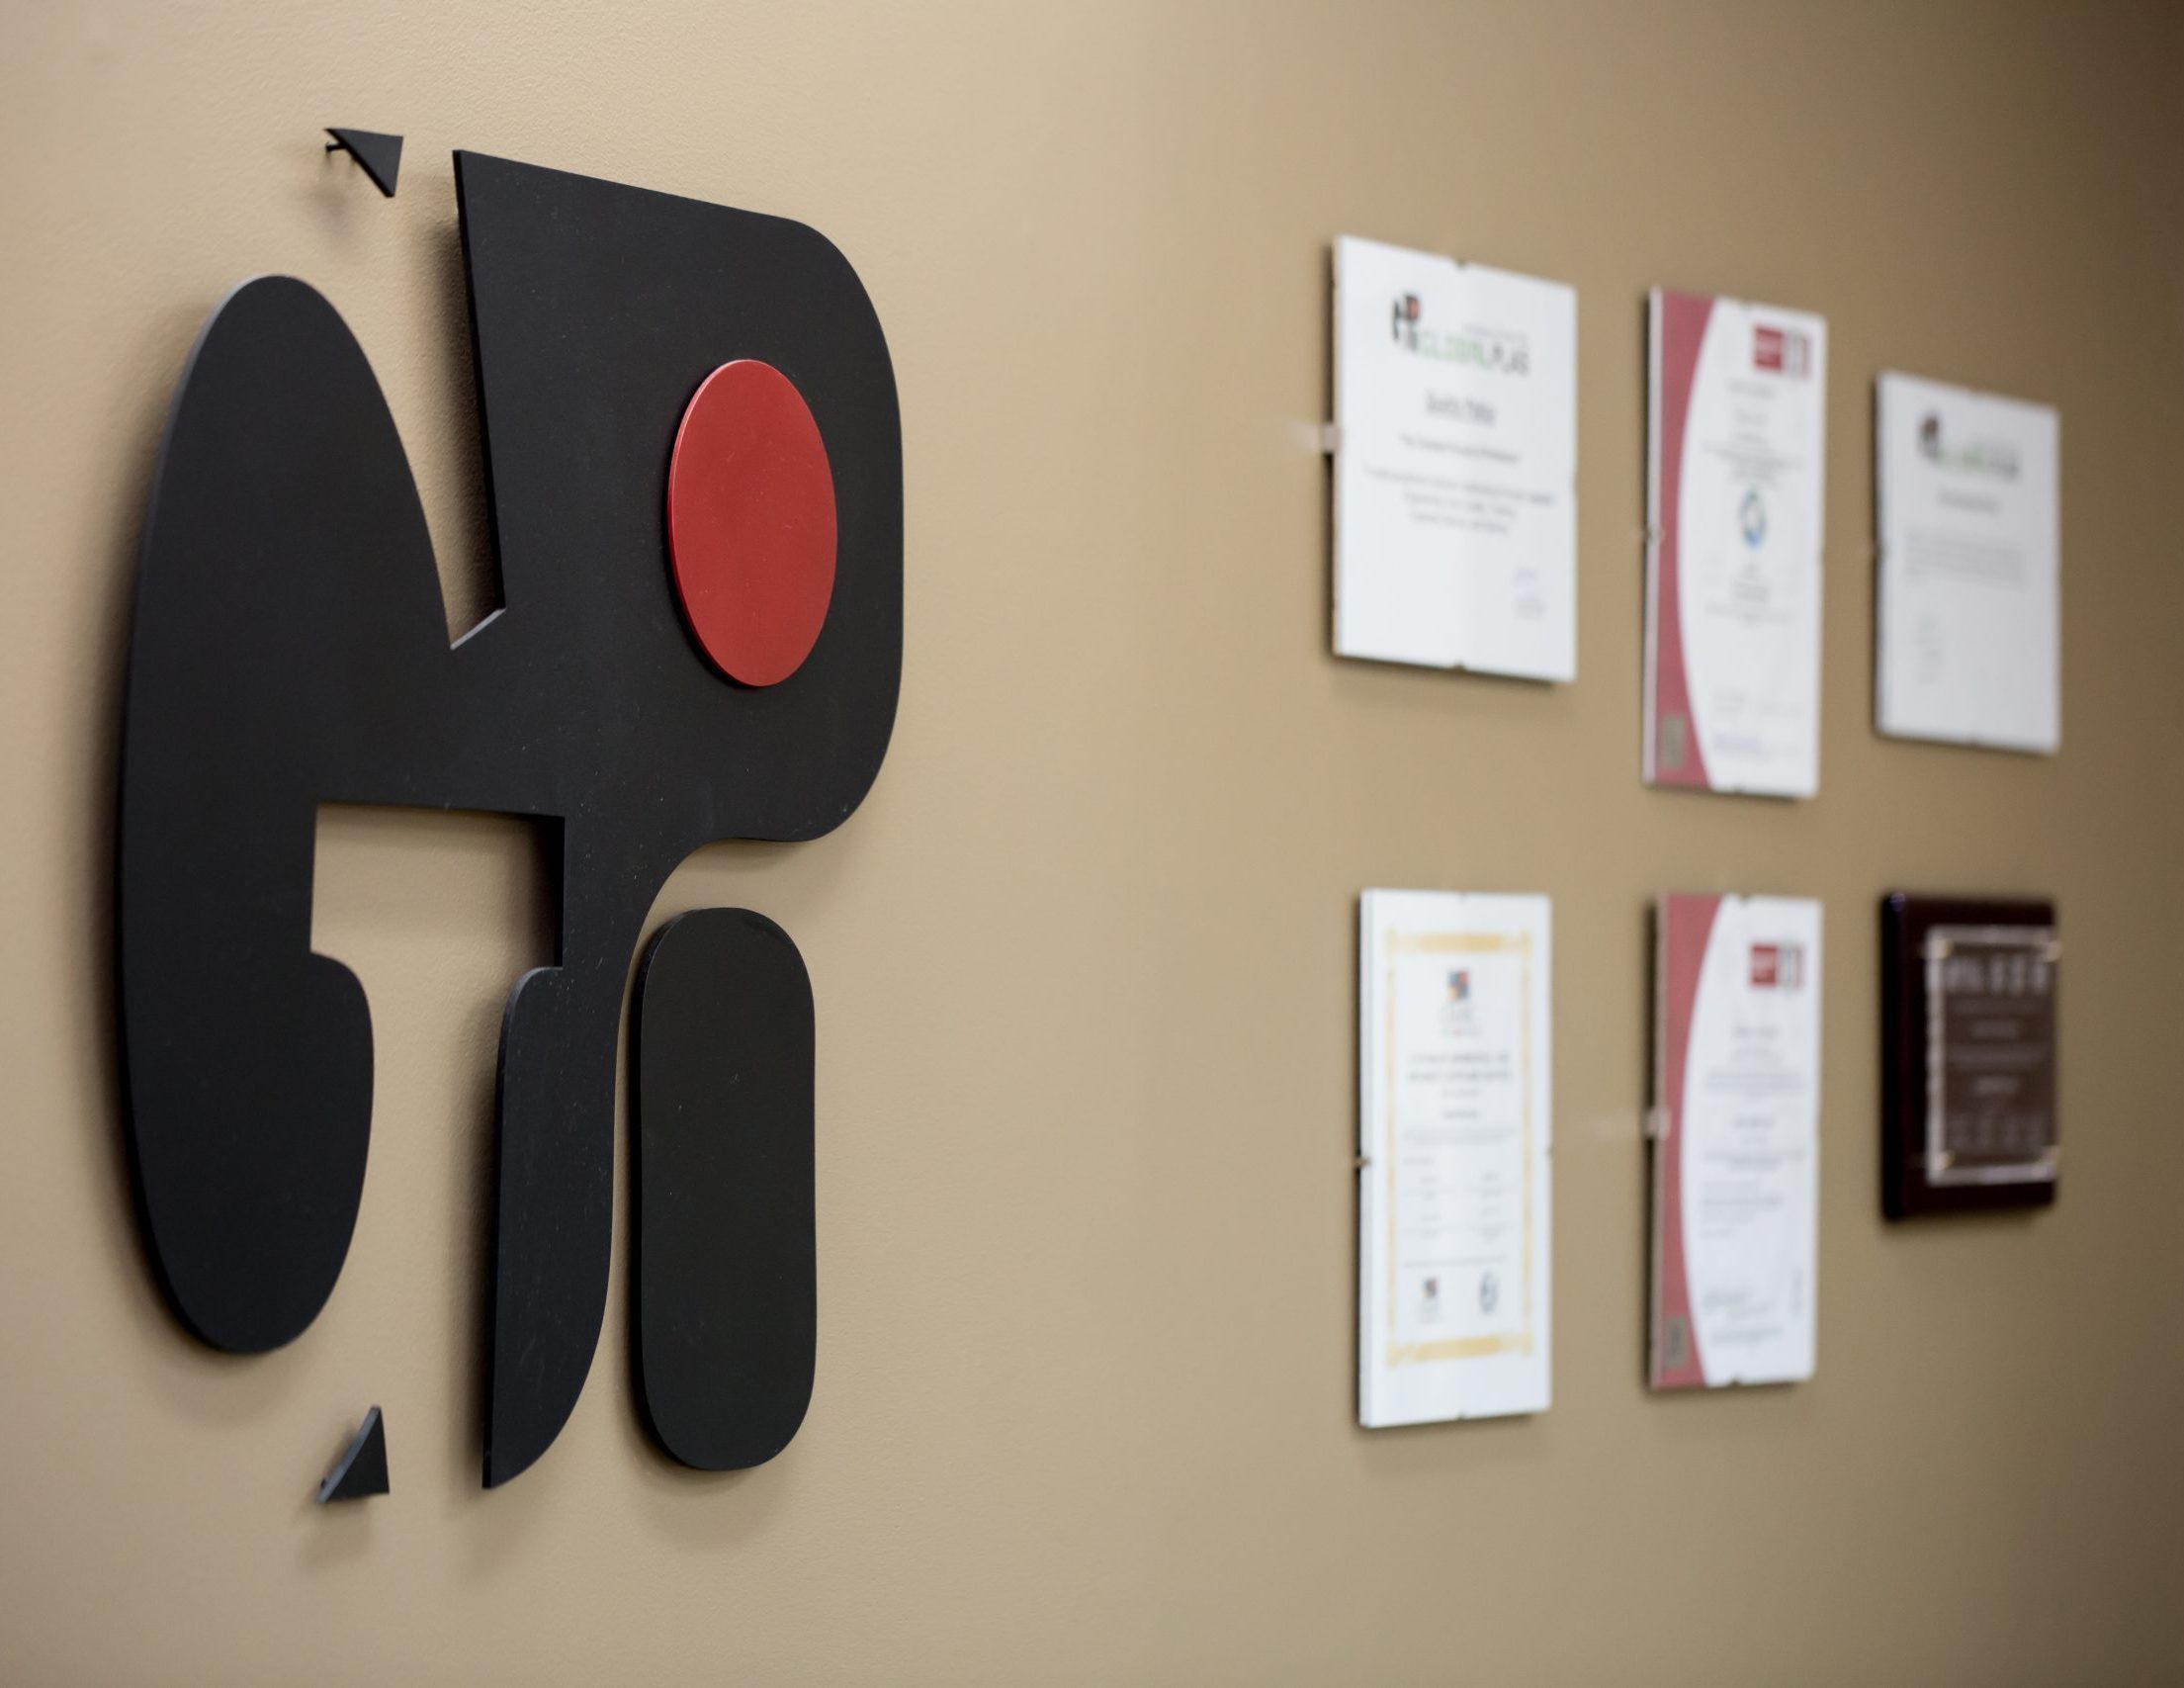 Picture of Global Plas Logo and Certifications on Wall